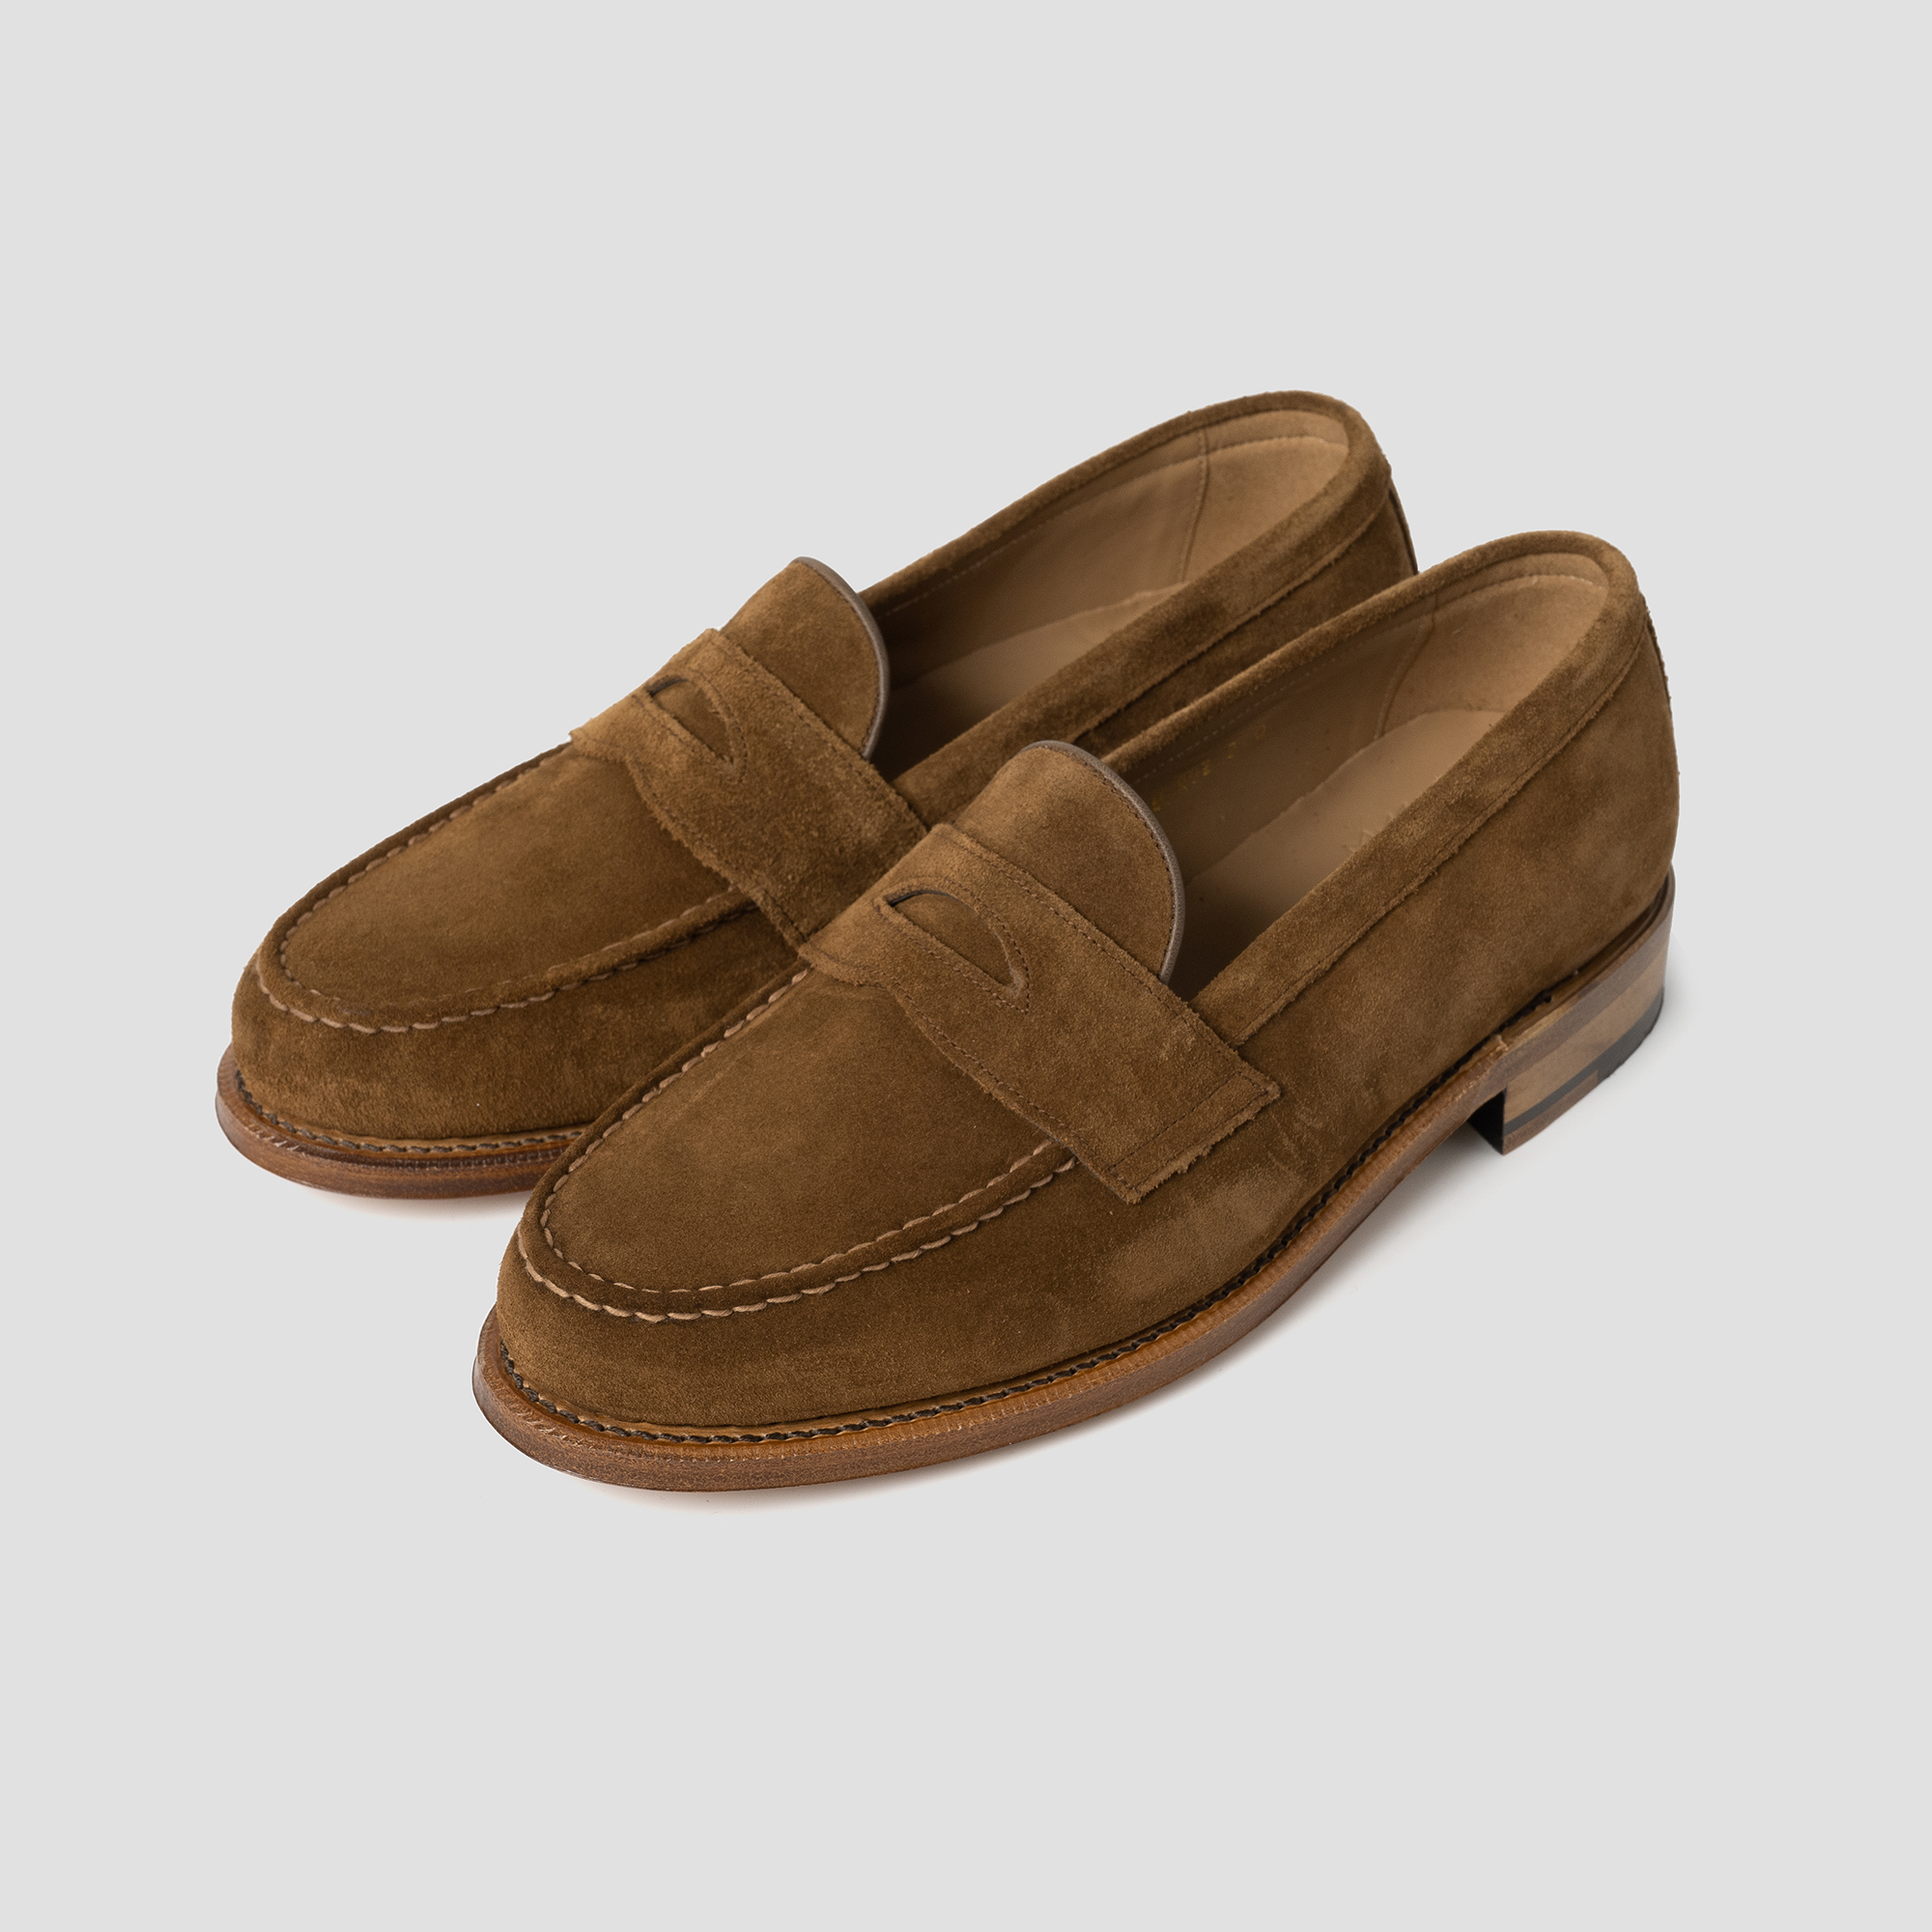 Goodyear Welted Suede Penny Loafer [Brown]